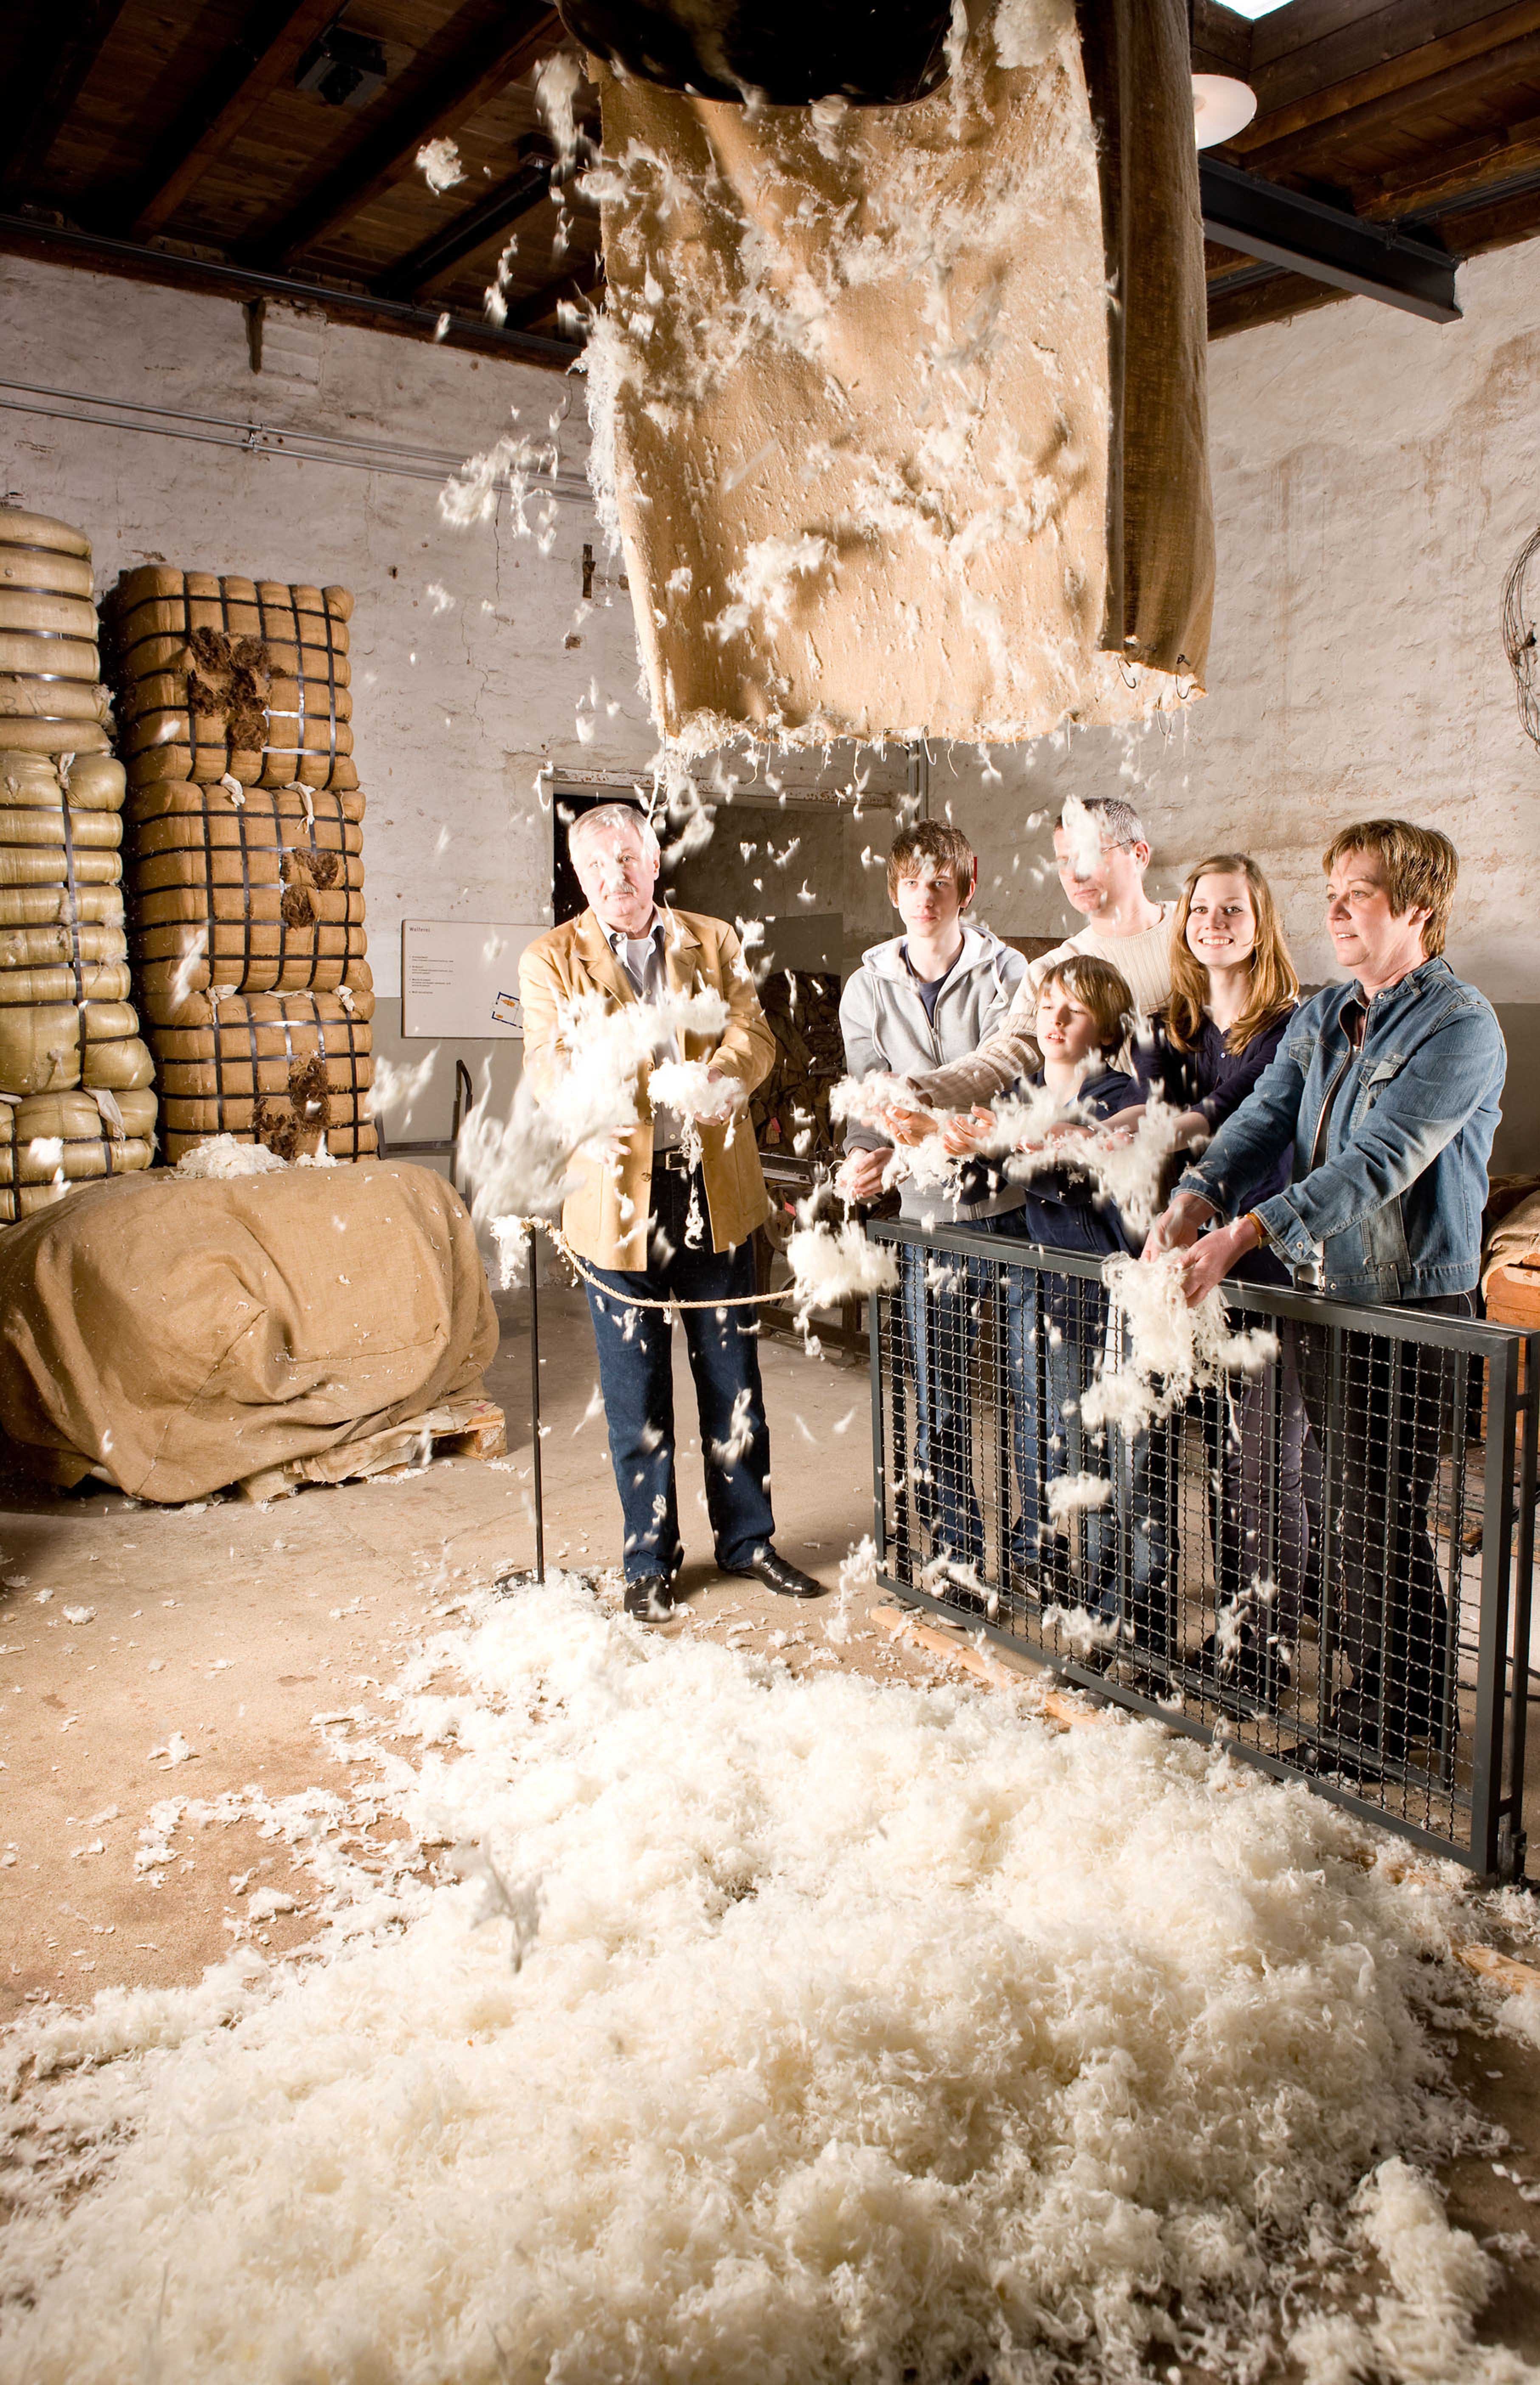 Frau Holle effect in the willowing shop. The carding machine busily disgorges flaked wool. (Photo: LVR-Zentrum für Medien und Bildung (LVR Centre for Media and Education)